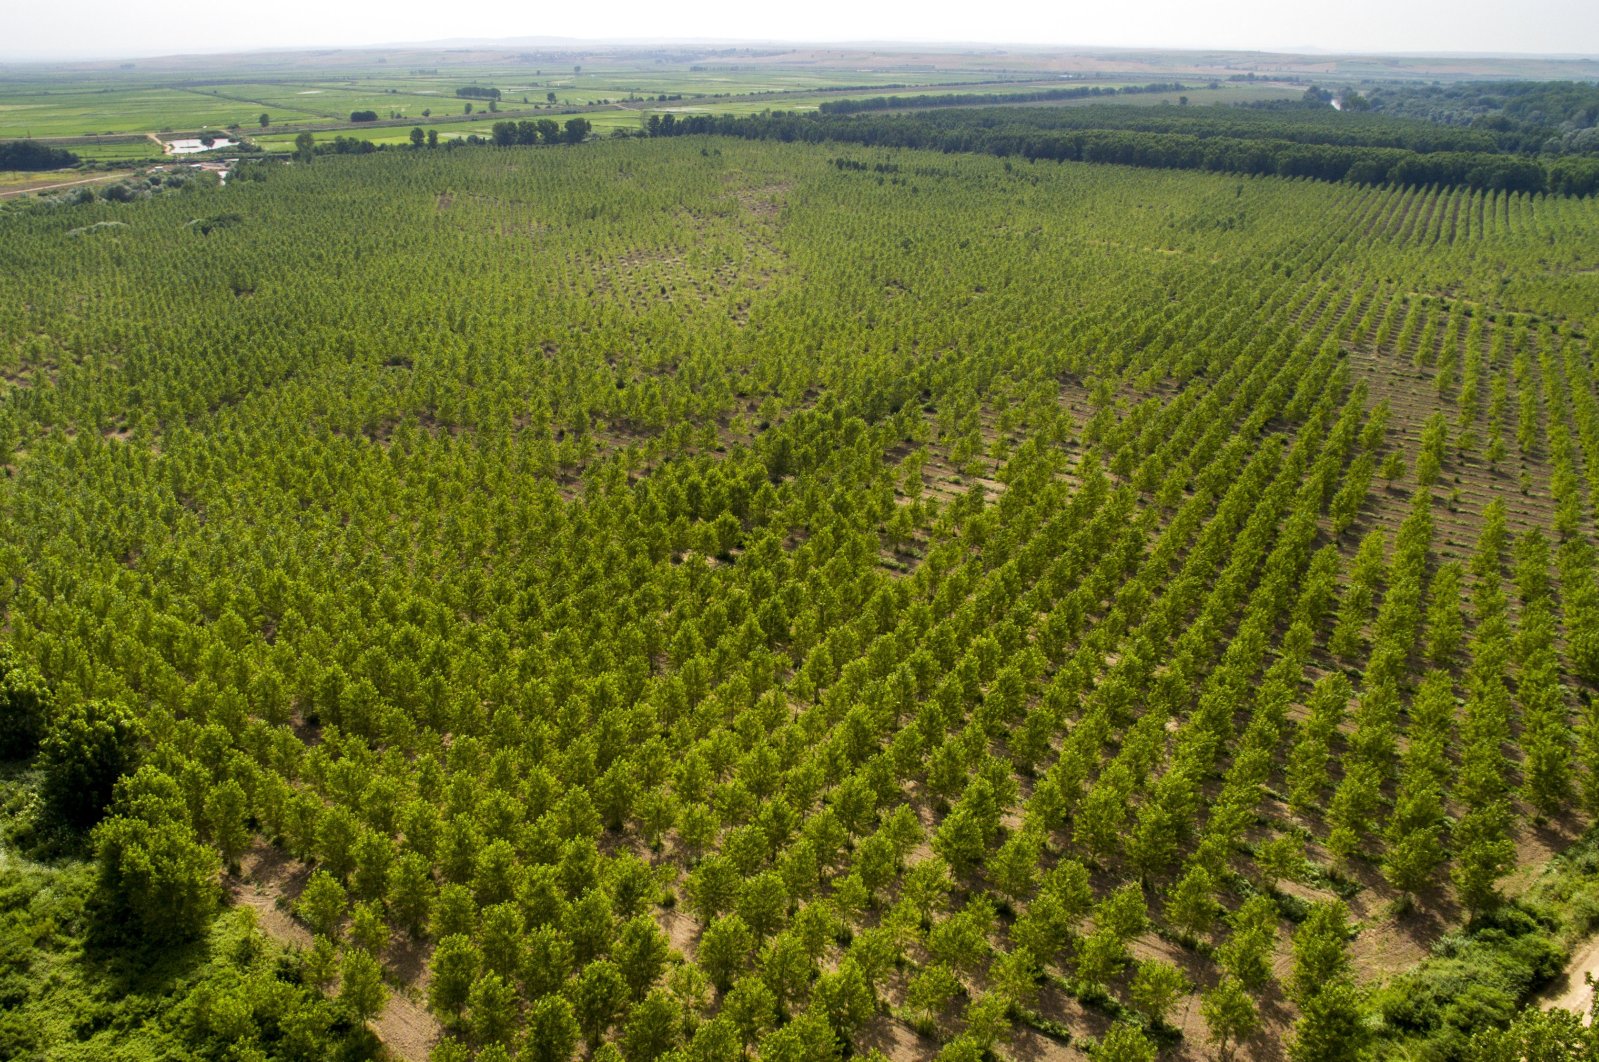 Thousands of saplings that are planted as part of a forestation campaign in northwestern Edirne, Aug. 6, 2017. (Sabah File Photo)